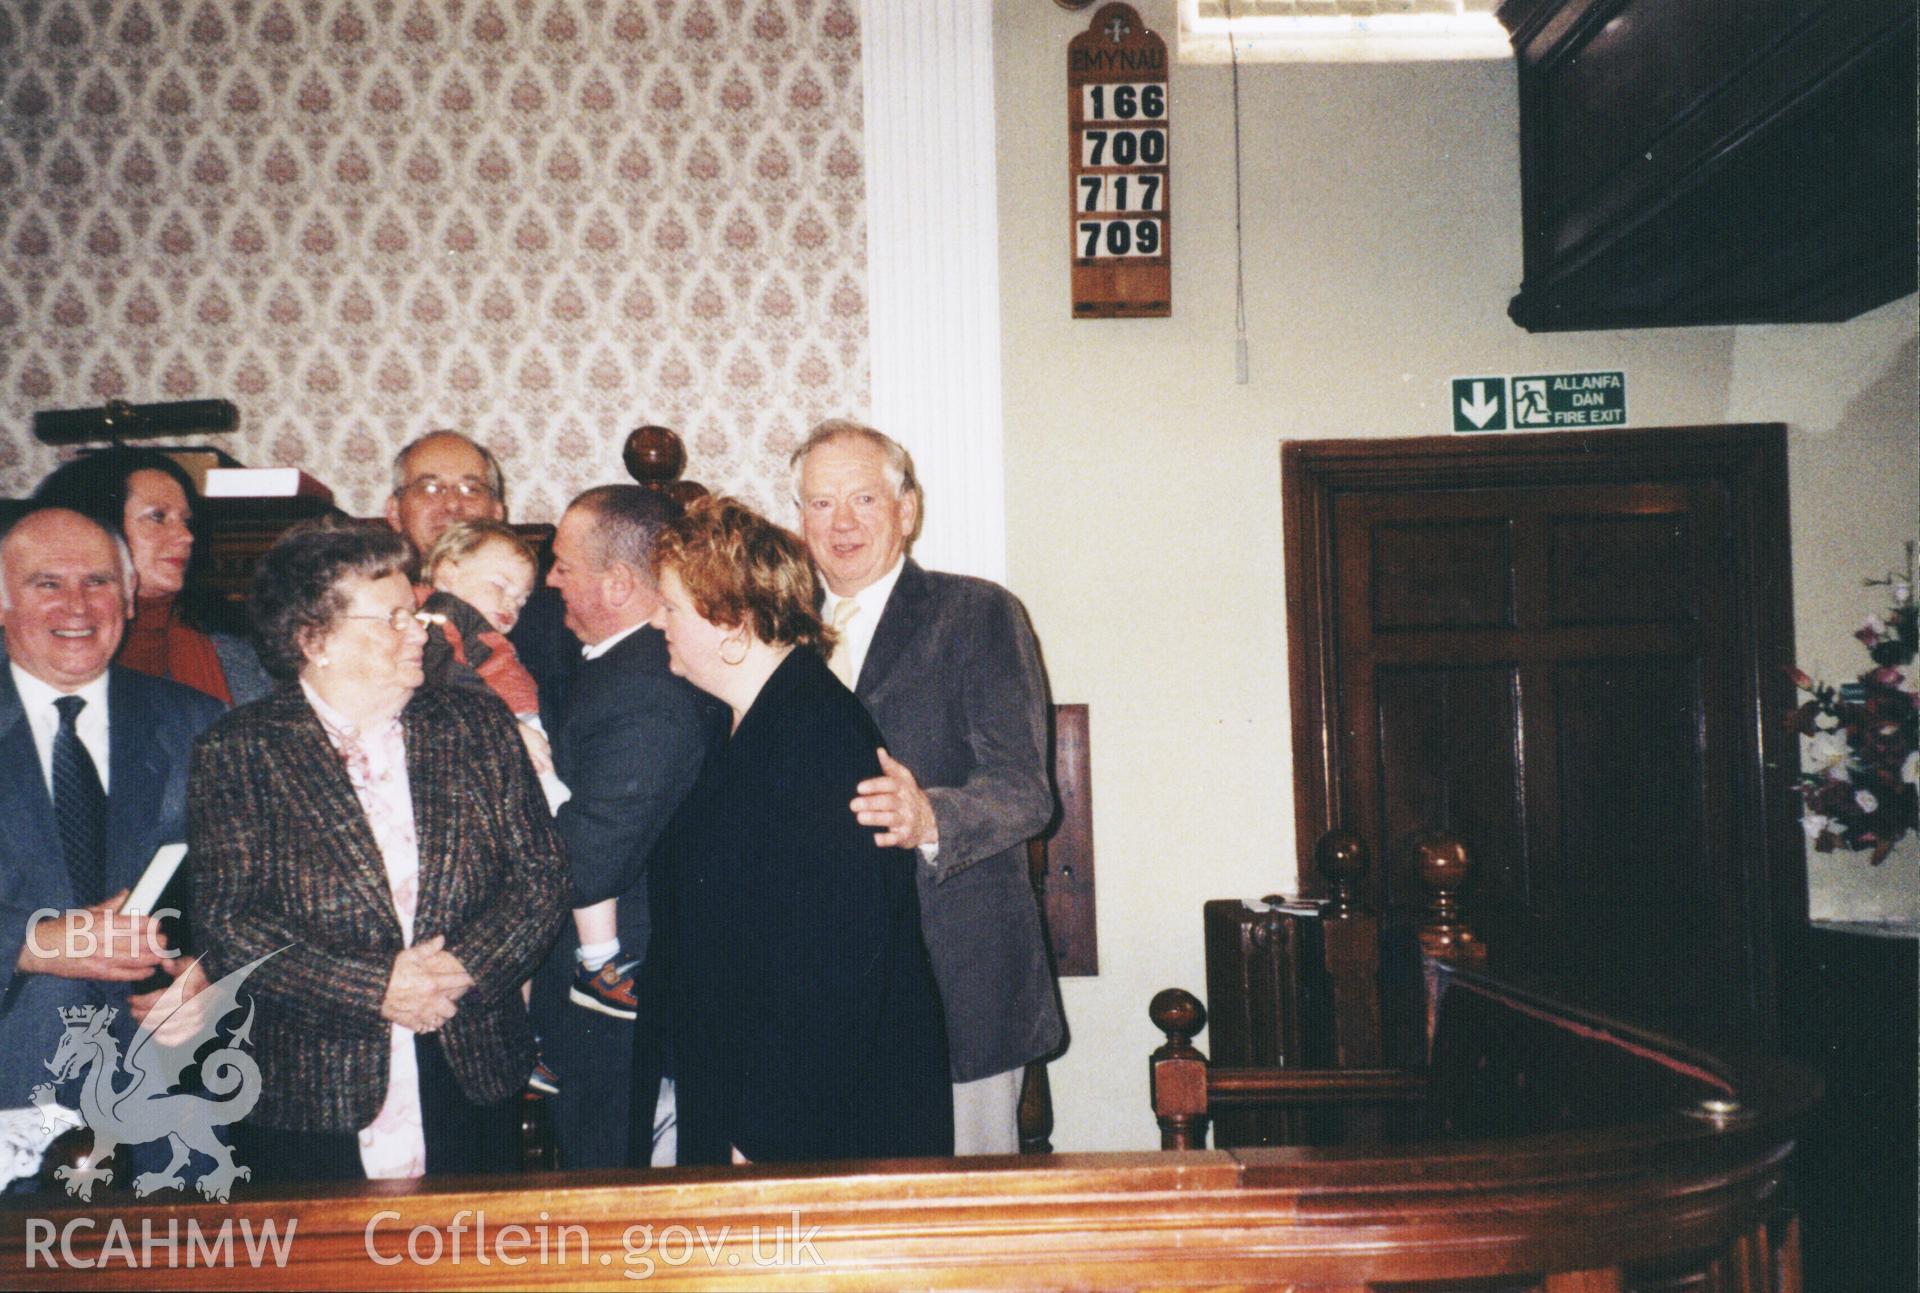 Colour photograph of Gareth Edwards (left), Nesta Williams and Robin Jones during christening, December 2006. Donated as part of the Digital Dissent Project.